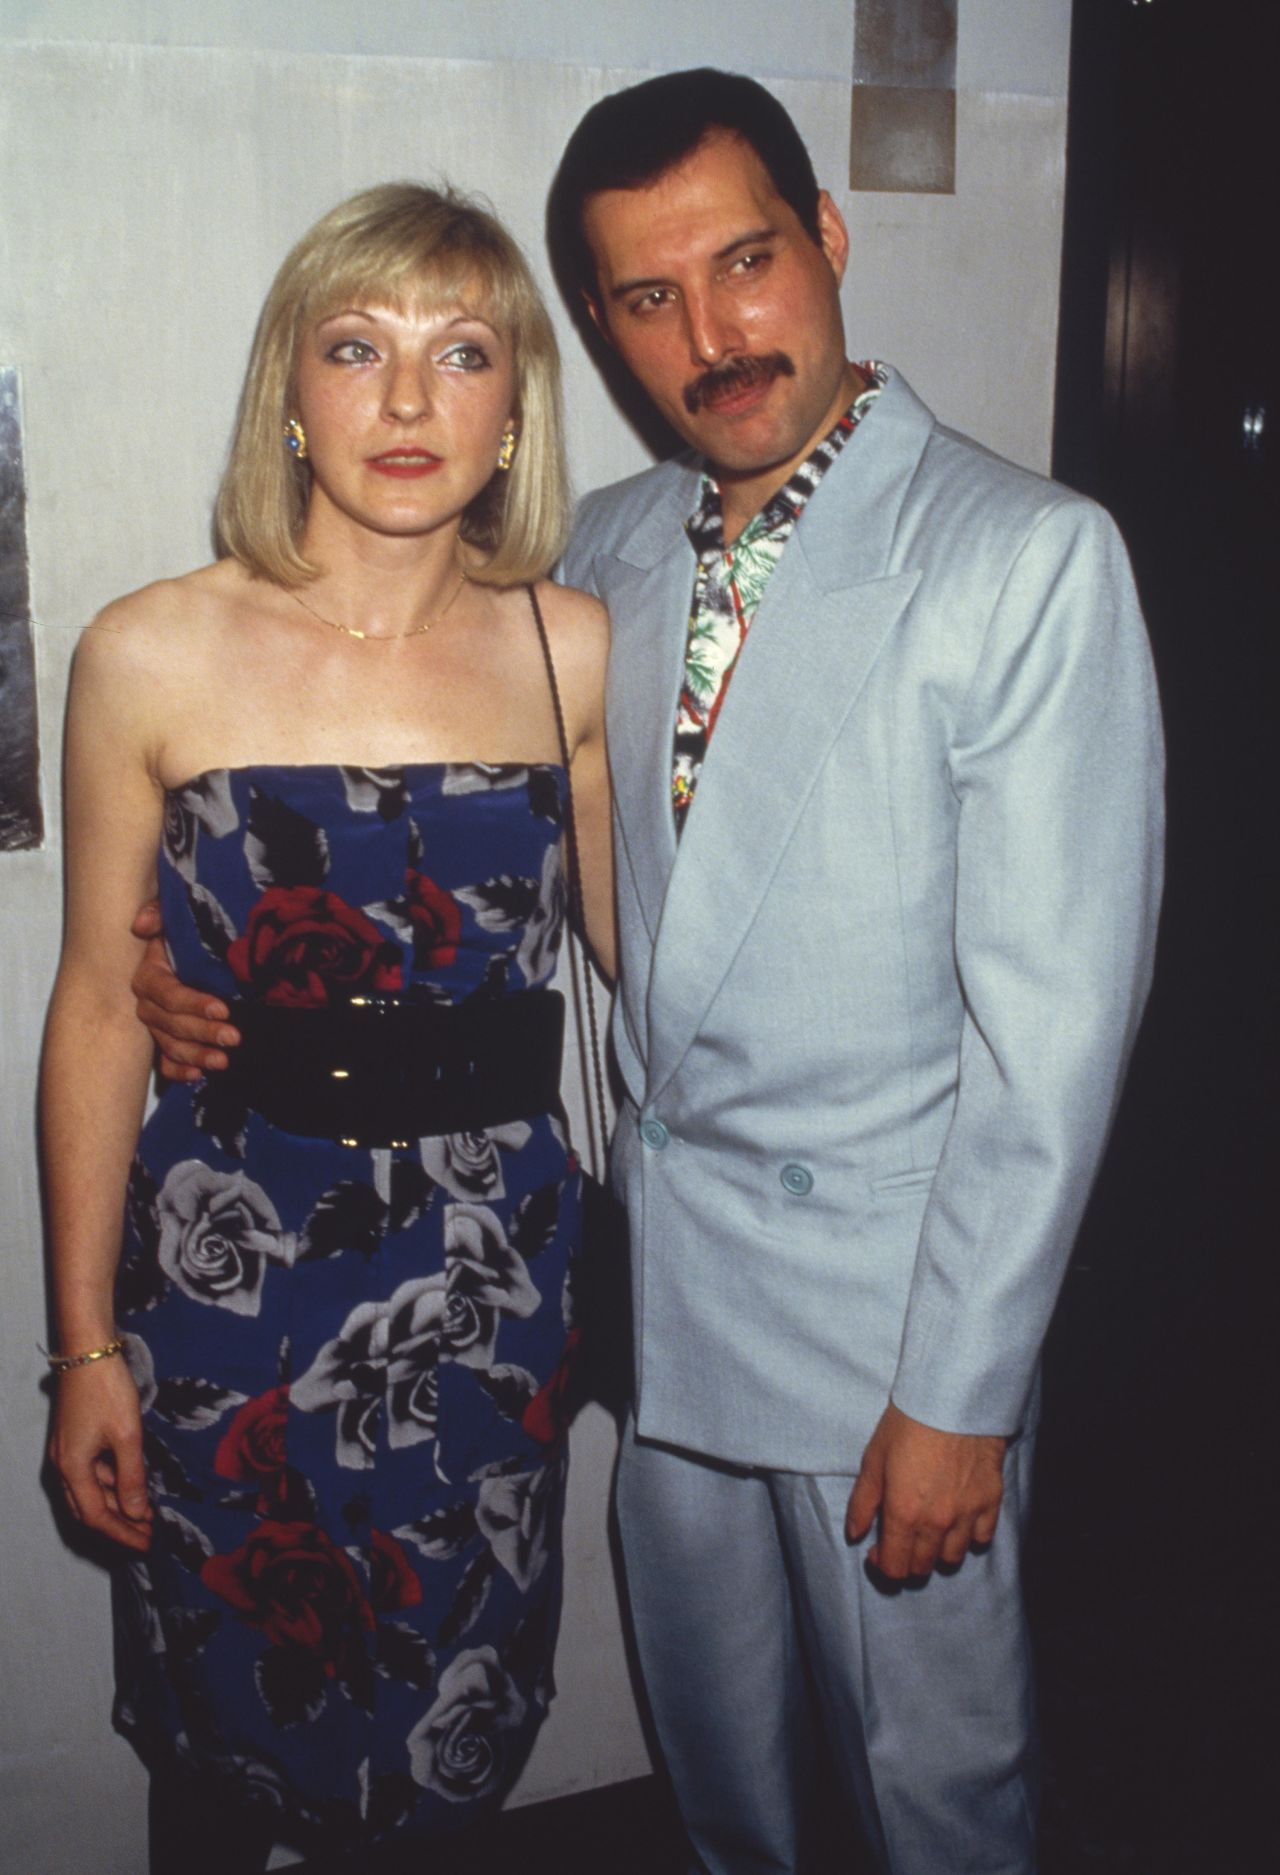 Mercury with his close friend Mary Austin, who is offering the items for sale.